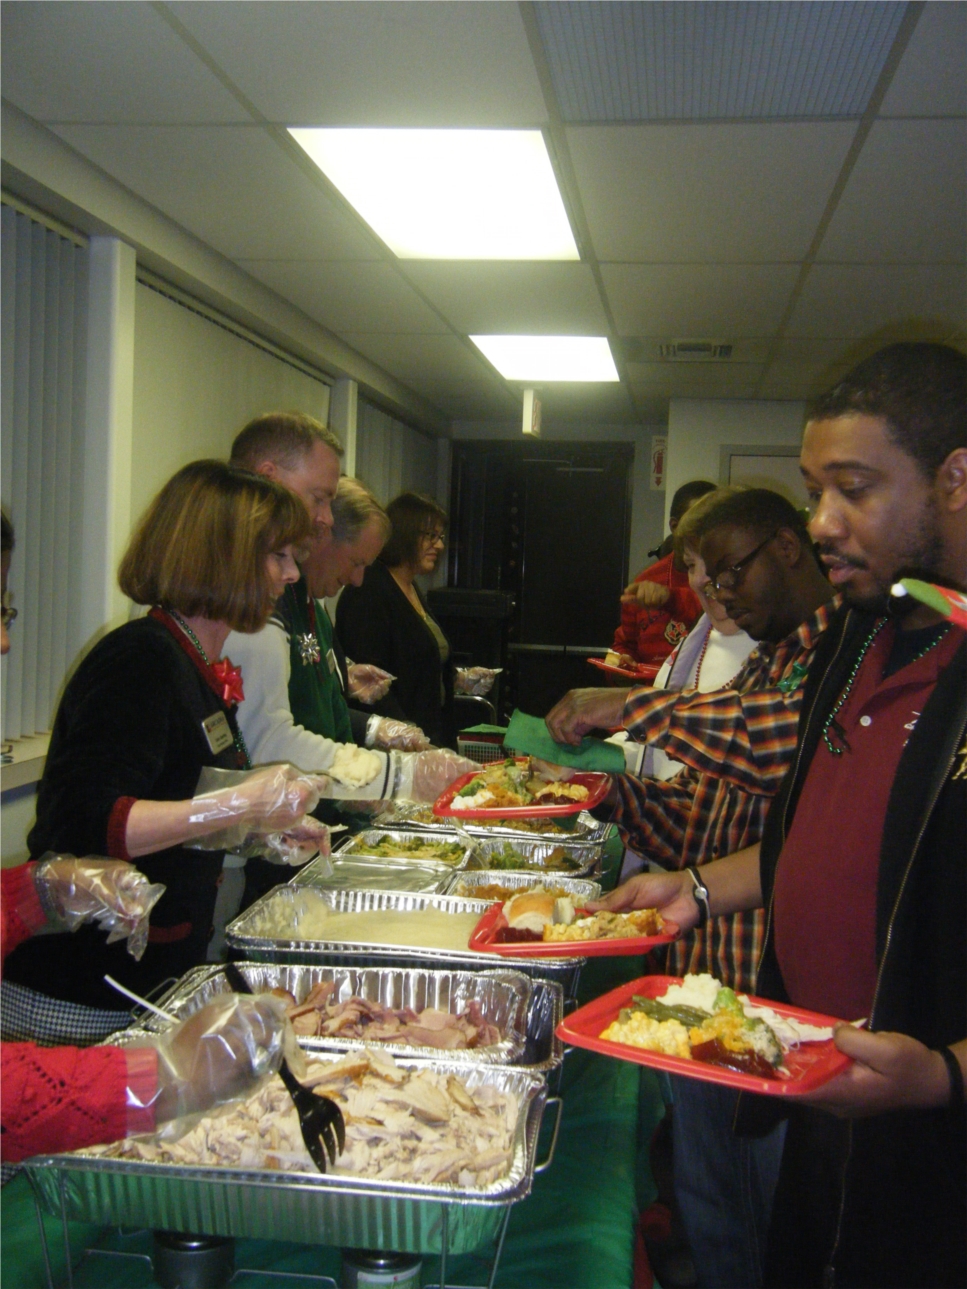 Arcadia provided a holiday dinner for the residents of The Judson's Center eight adult group homes.  Ham and turkey with all the fixings (plus dessert = yum) were served by our senior management team.  Santa made a visit to deliver gifts to all the residents.